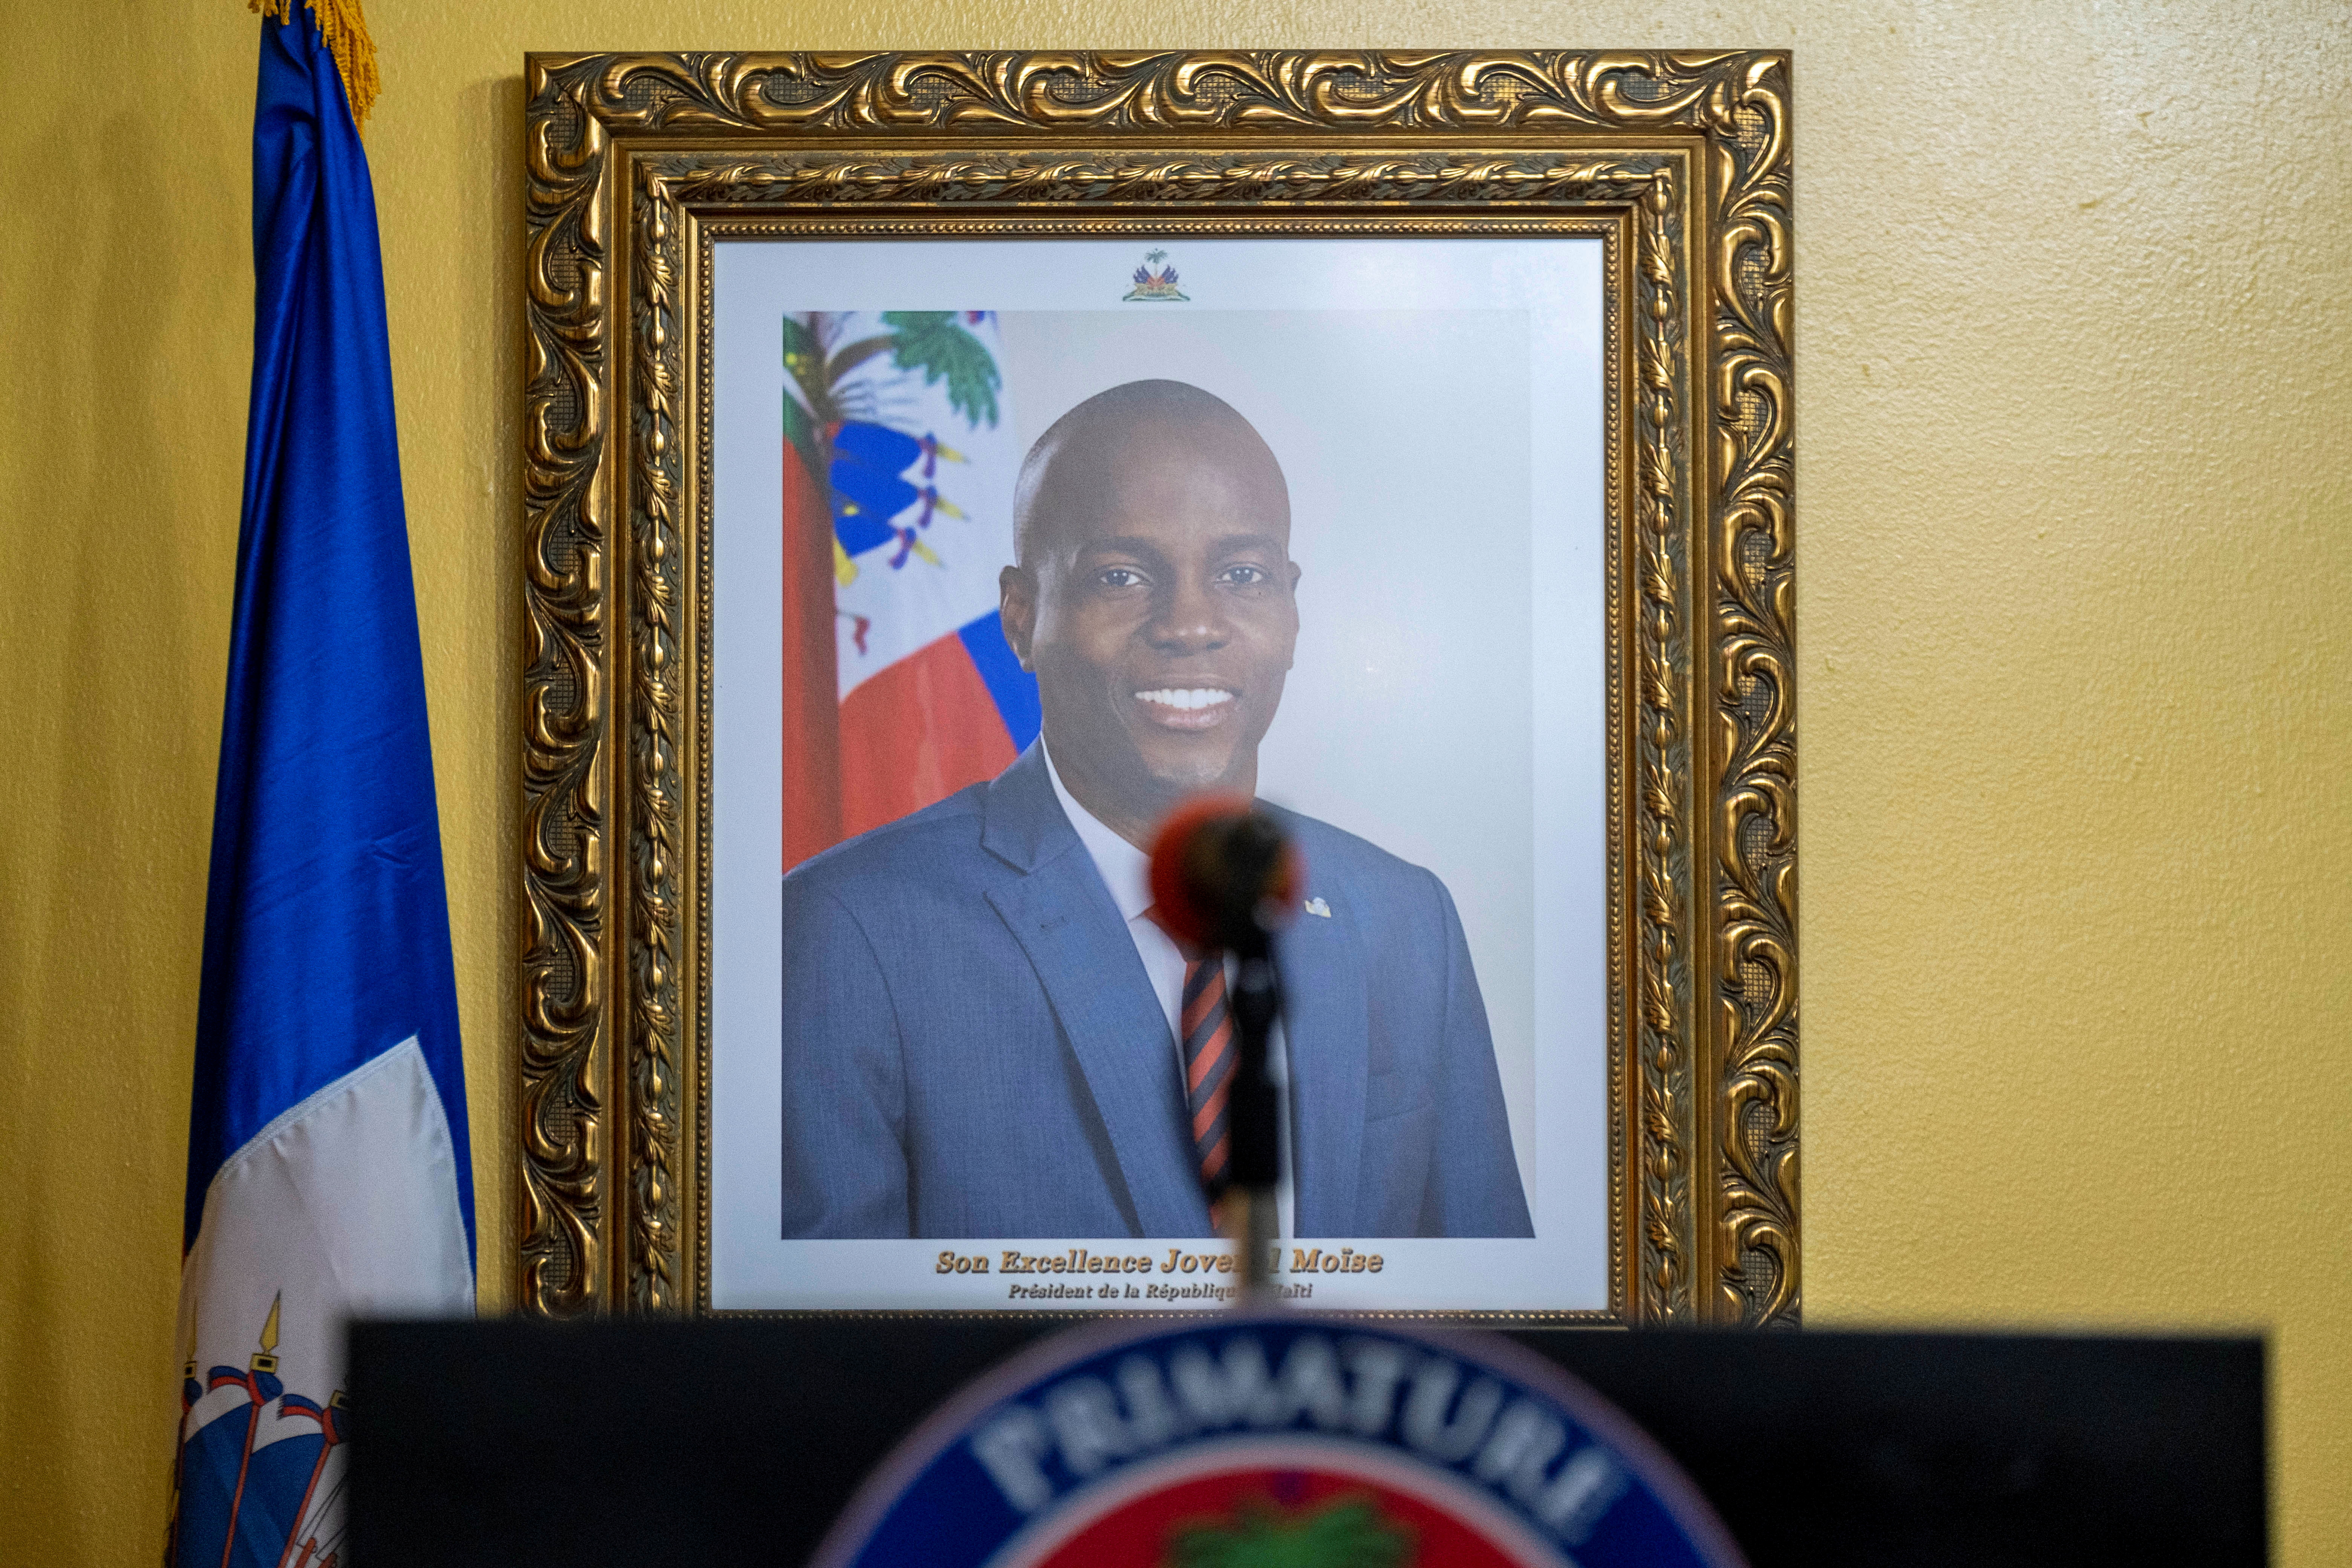 A picture of the late Haitian President Jovenel Moise hangs on a wall before a news conference by interim Prime Minister Claude Joseph at his house, almost a week after his assassination, in Port-au-Prince, Haiti July 13, 2021. REUTERS/Ricardo Arduengo